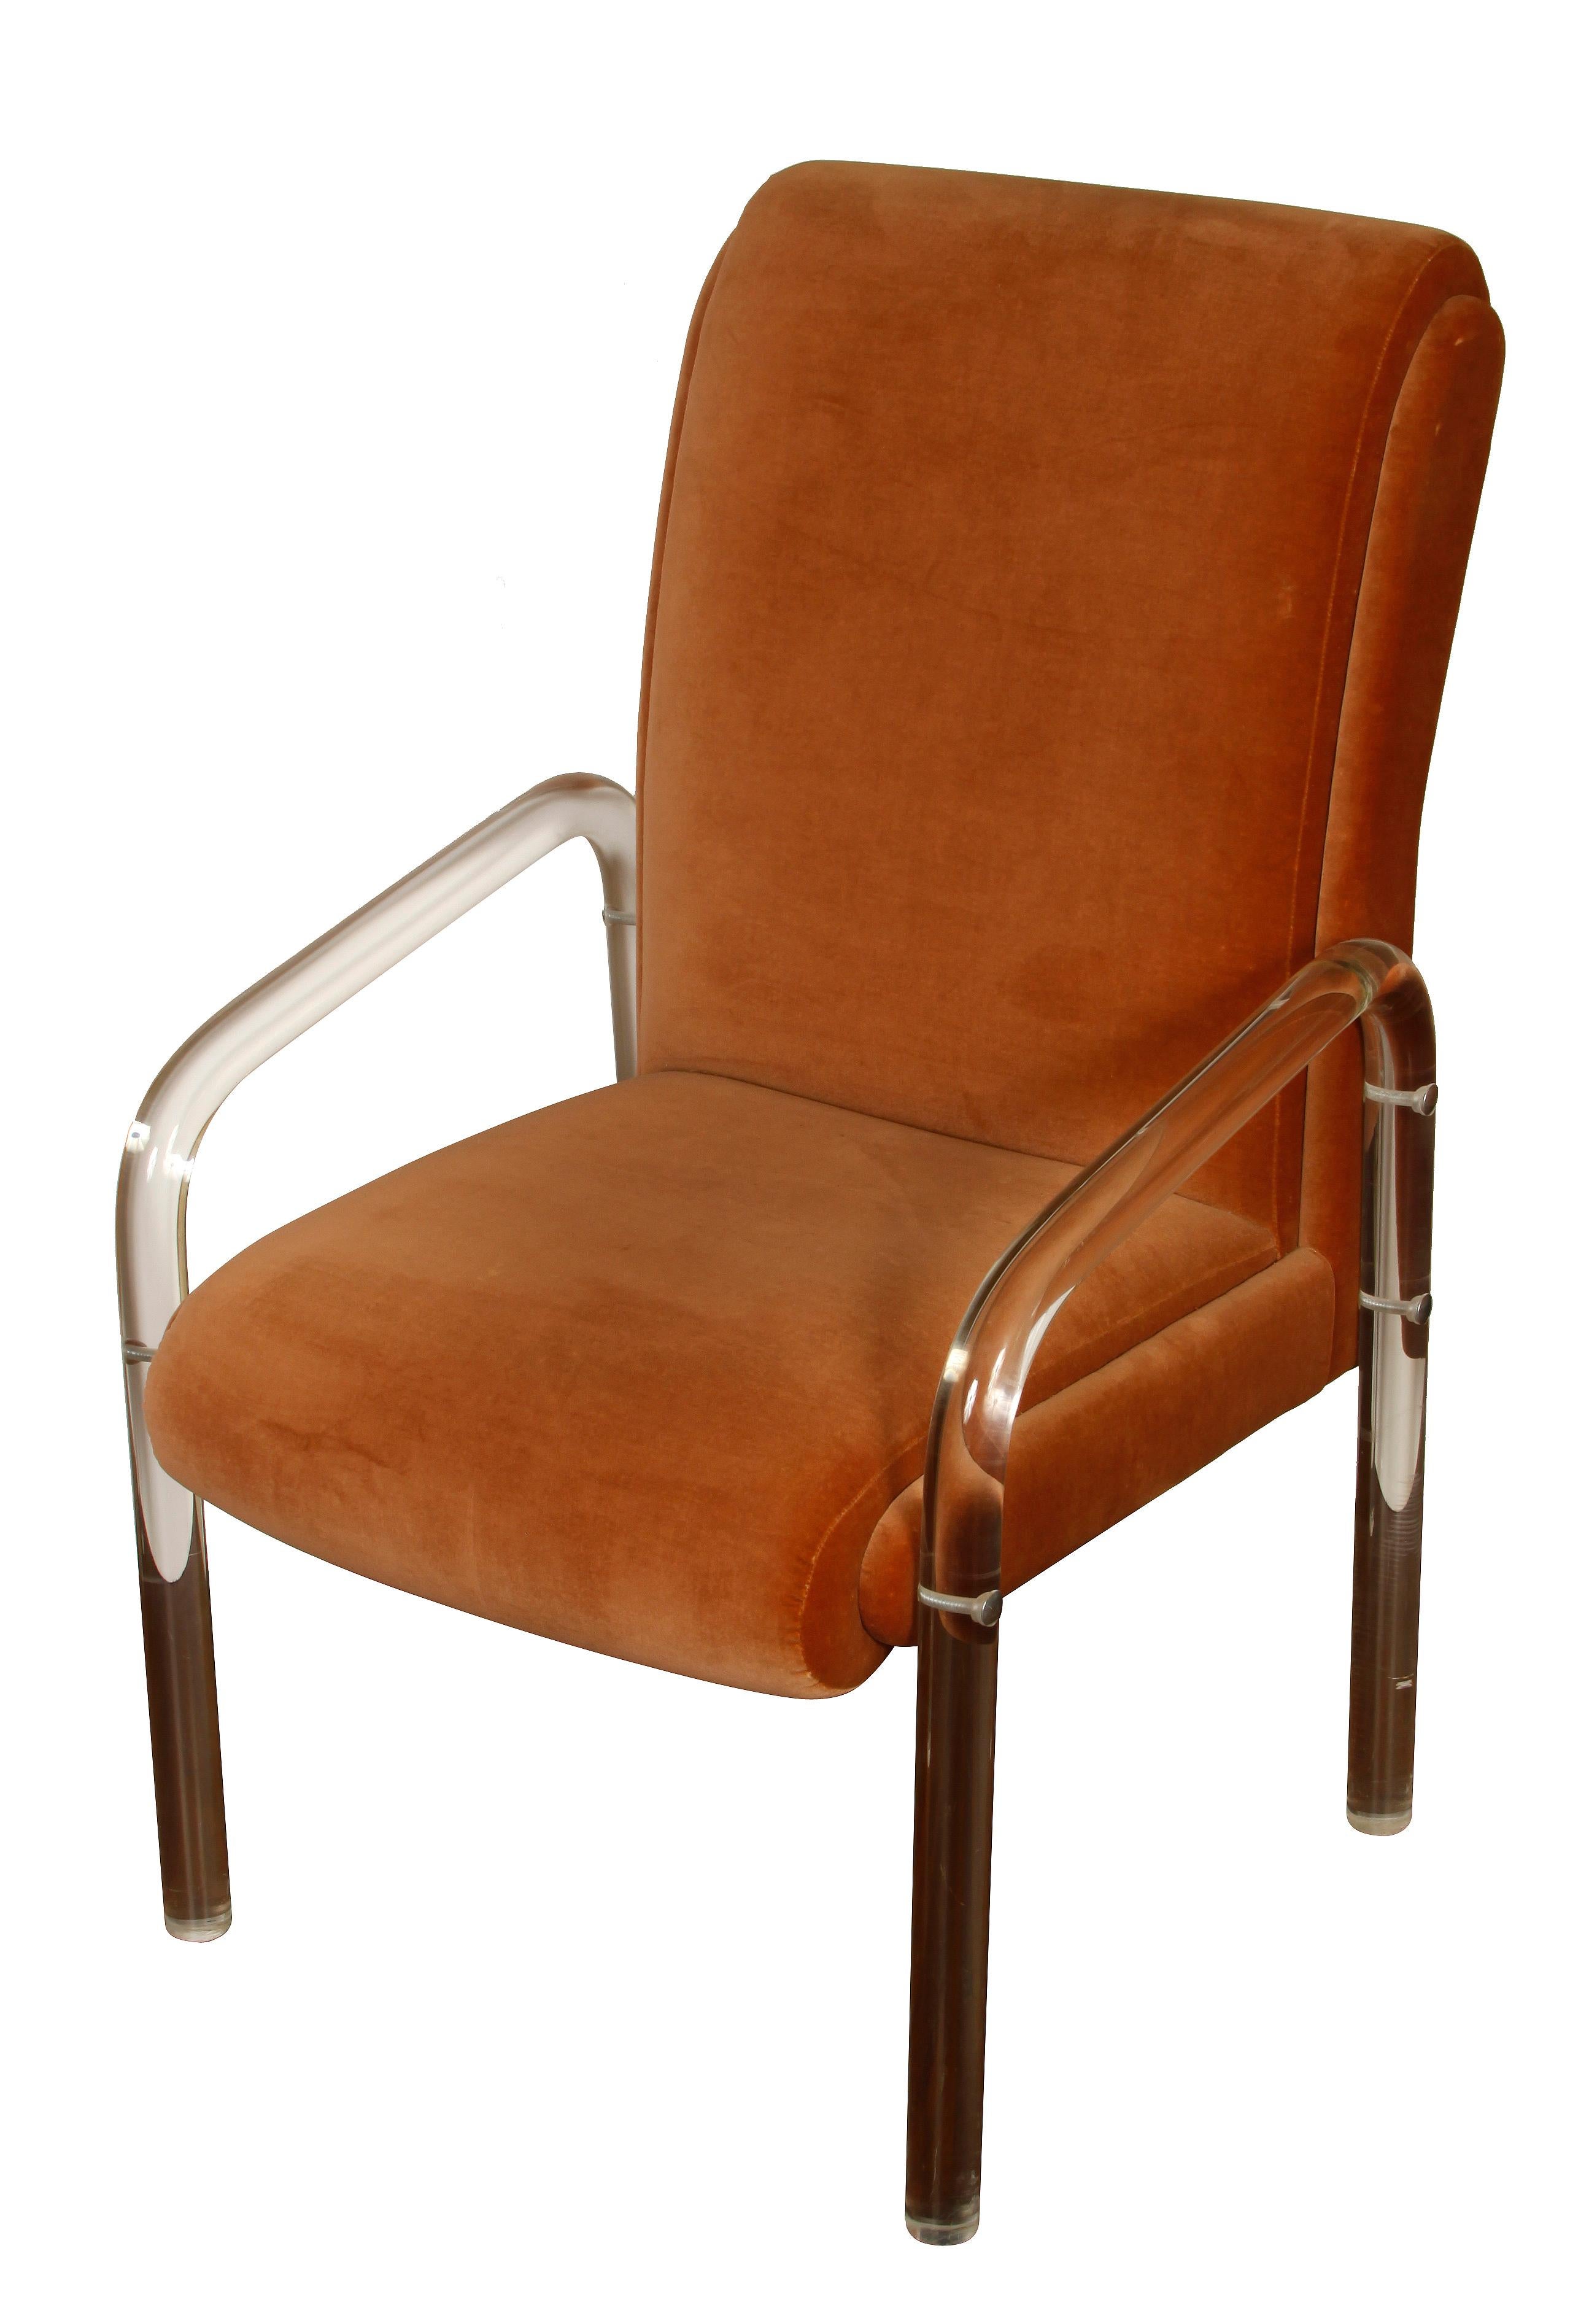 A pair of Leon Frost signed Lucite armchairs with upholstered velvet seat and back, curved modern design.